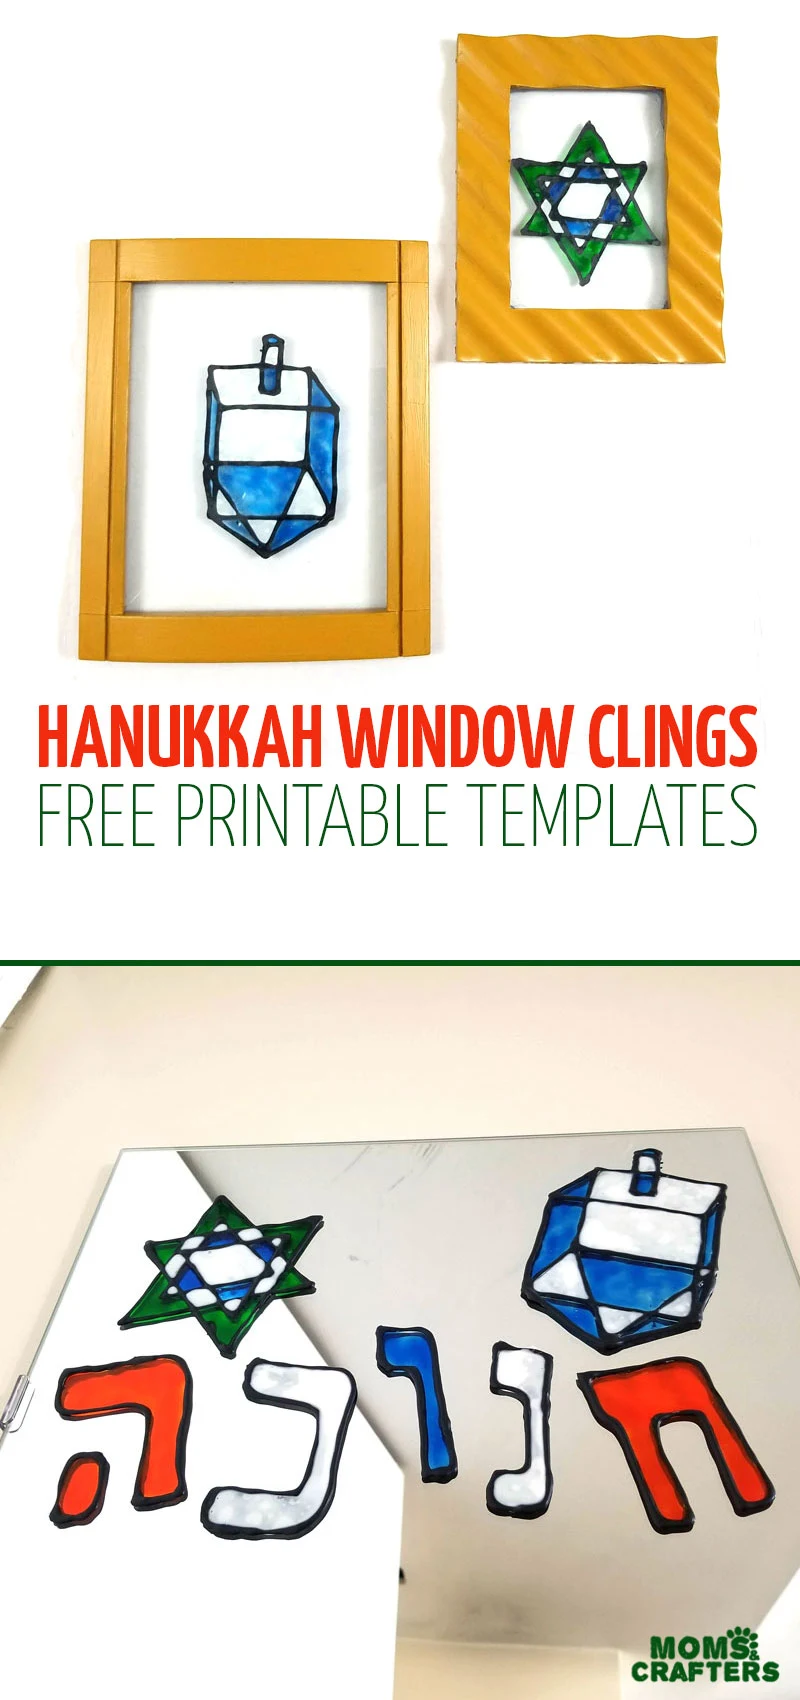 Make some fun DIY Hanukkah window clings witha super fun free printable template! This sweet Chanukah craft for kids and adults make great Hannukah decor